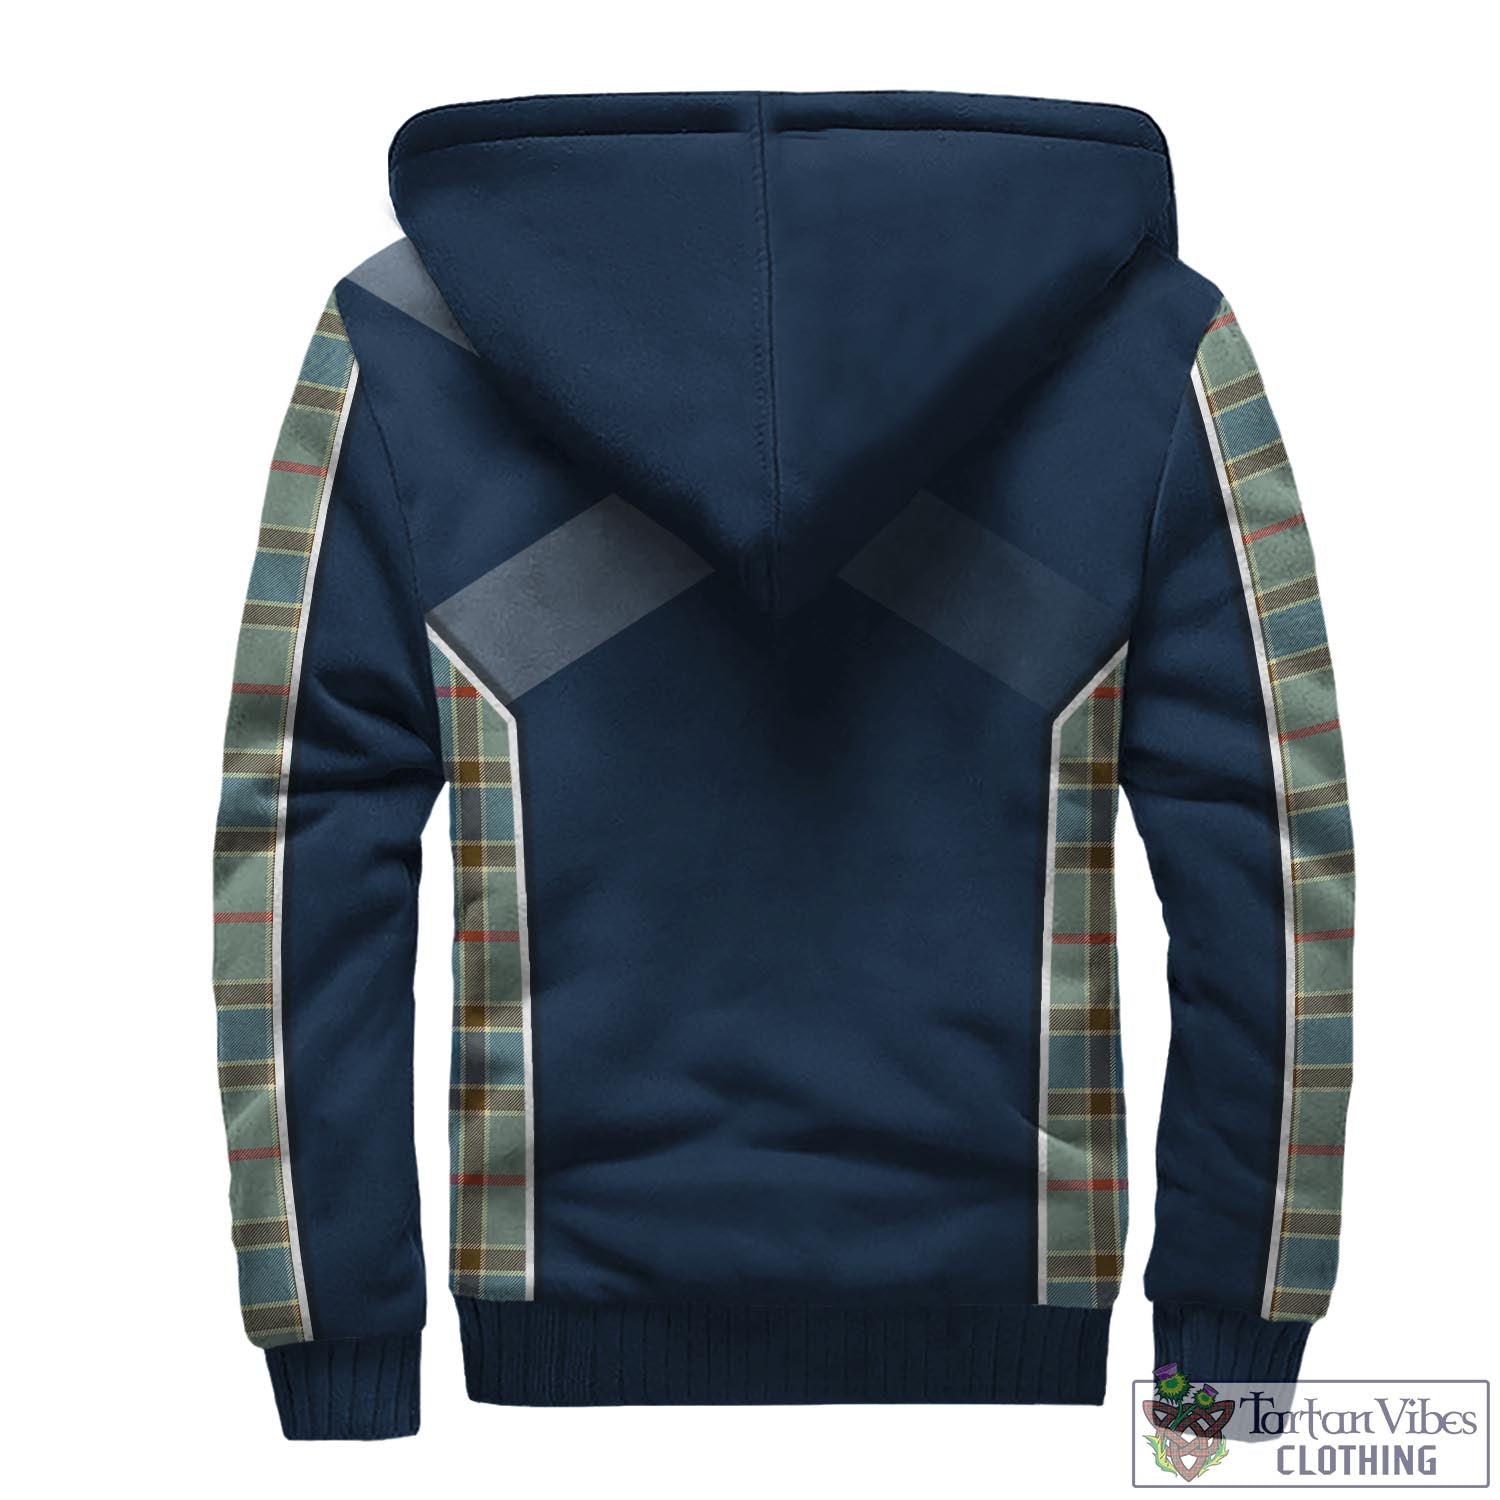 Tartan Vibes Clothing Balfour Blue Tartan Sherpa Hoodie with Family Crest and Scottish Thistle Vibes Sport Style